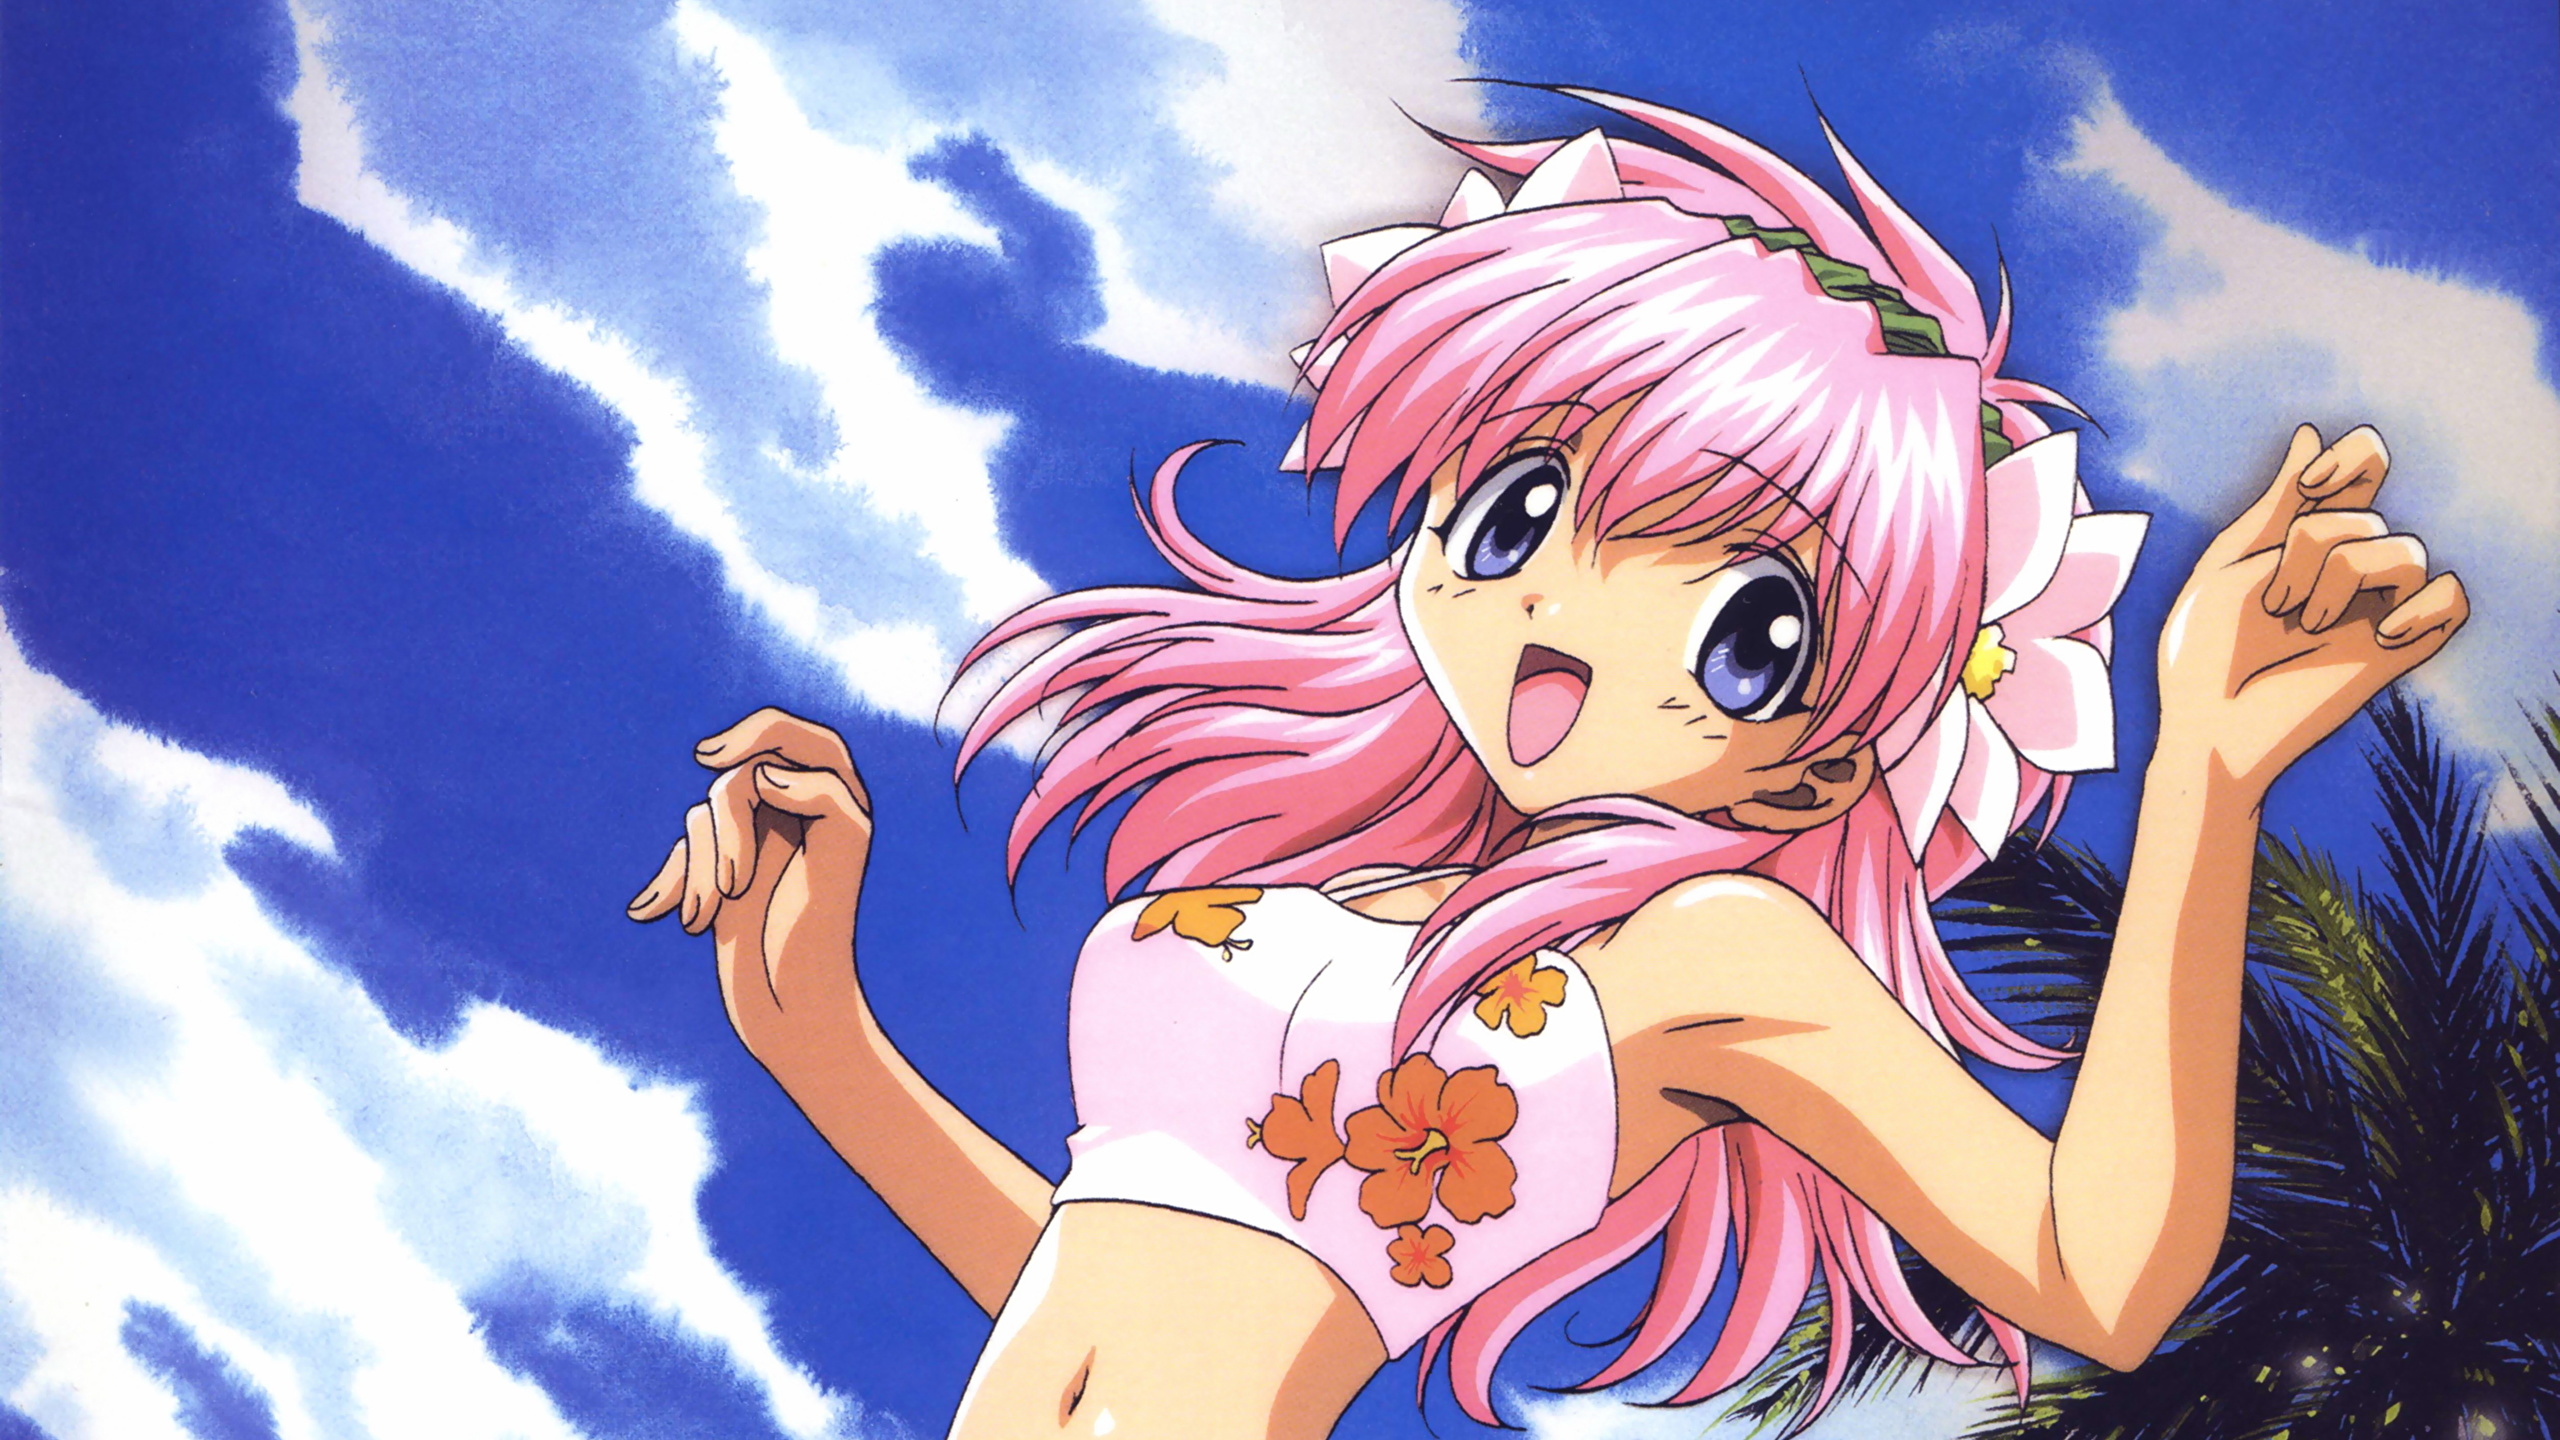 Desktop Wallpapers Galaxy Angel Anime Young Woman 2560x1440